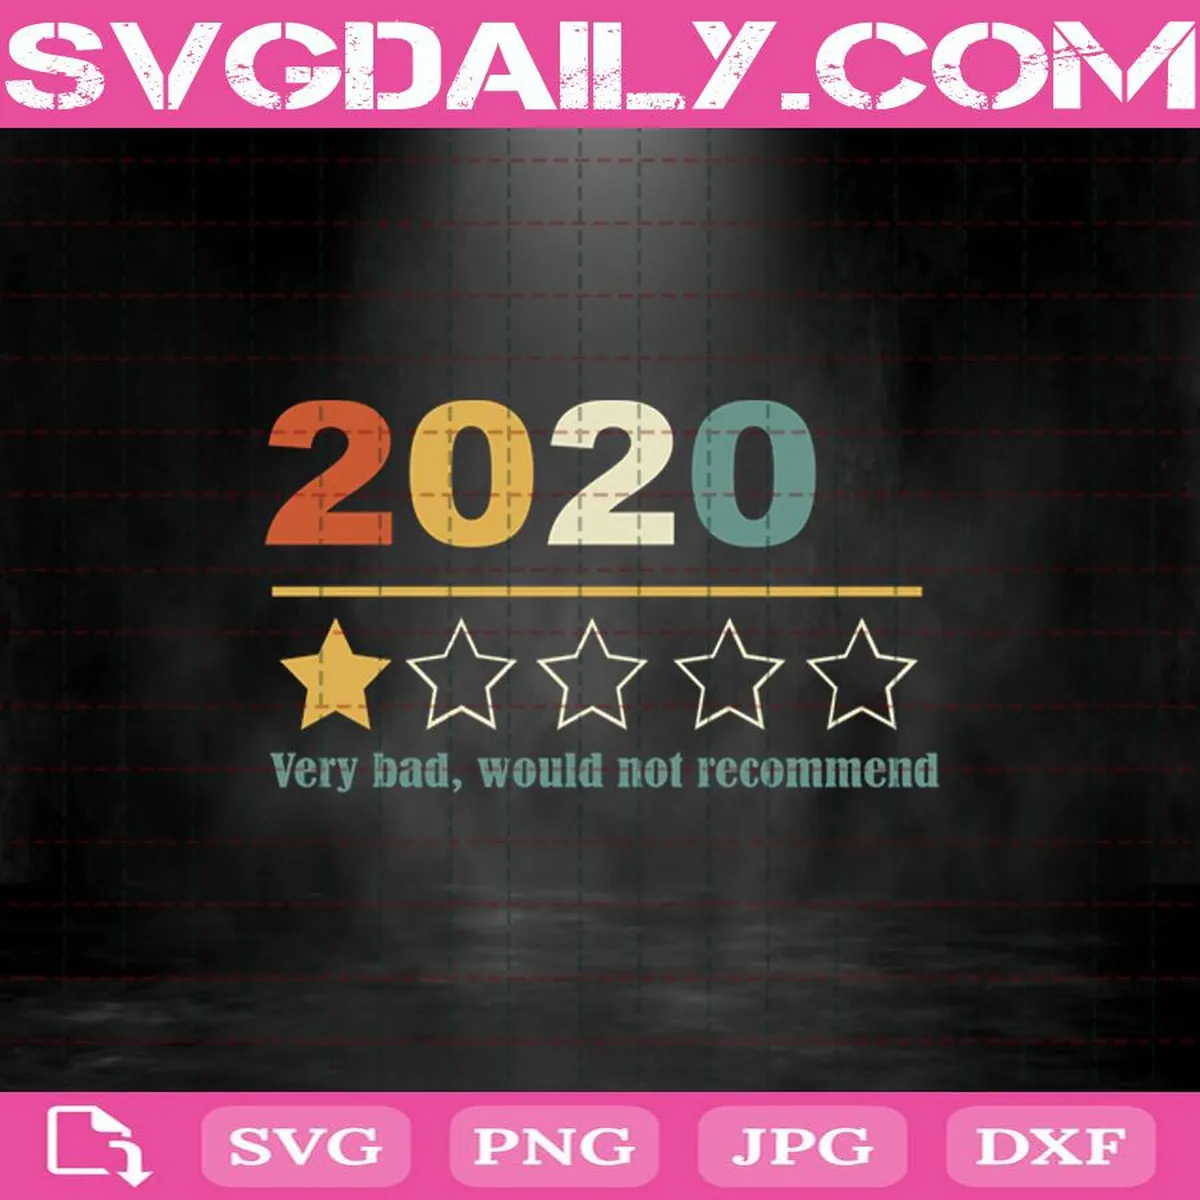 2020 Very Bad Would Not Recommed Svg, Rate A Star 2020 Quarantine Social Distancing Svg, 2020 Svg